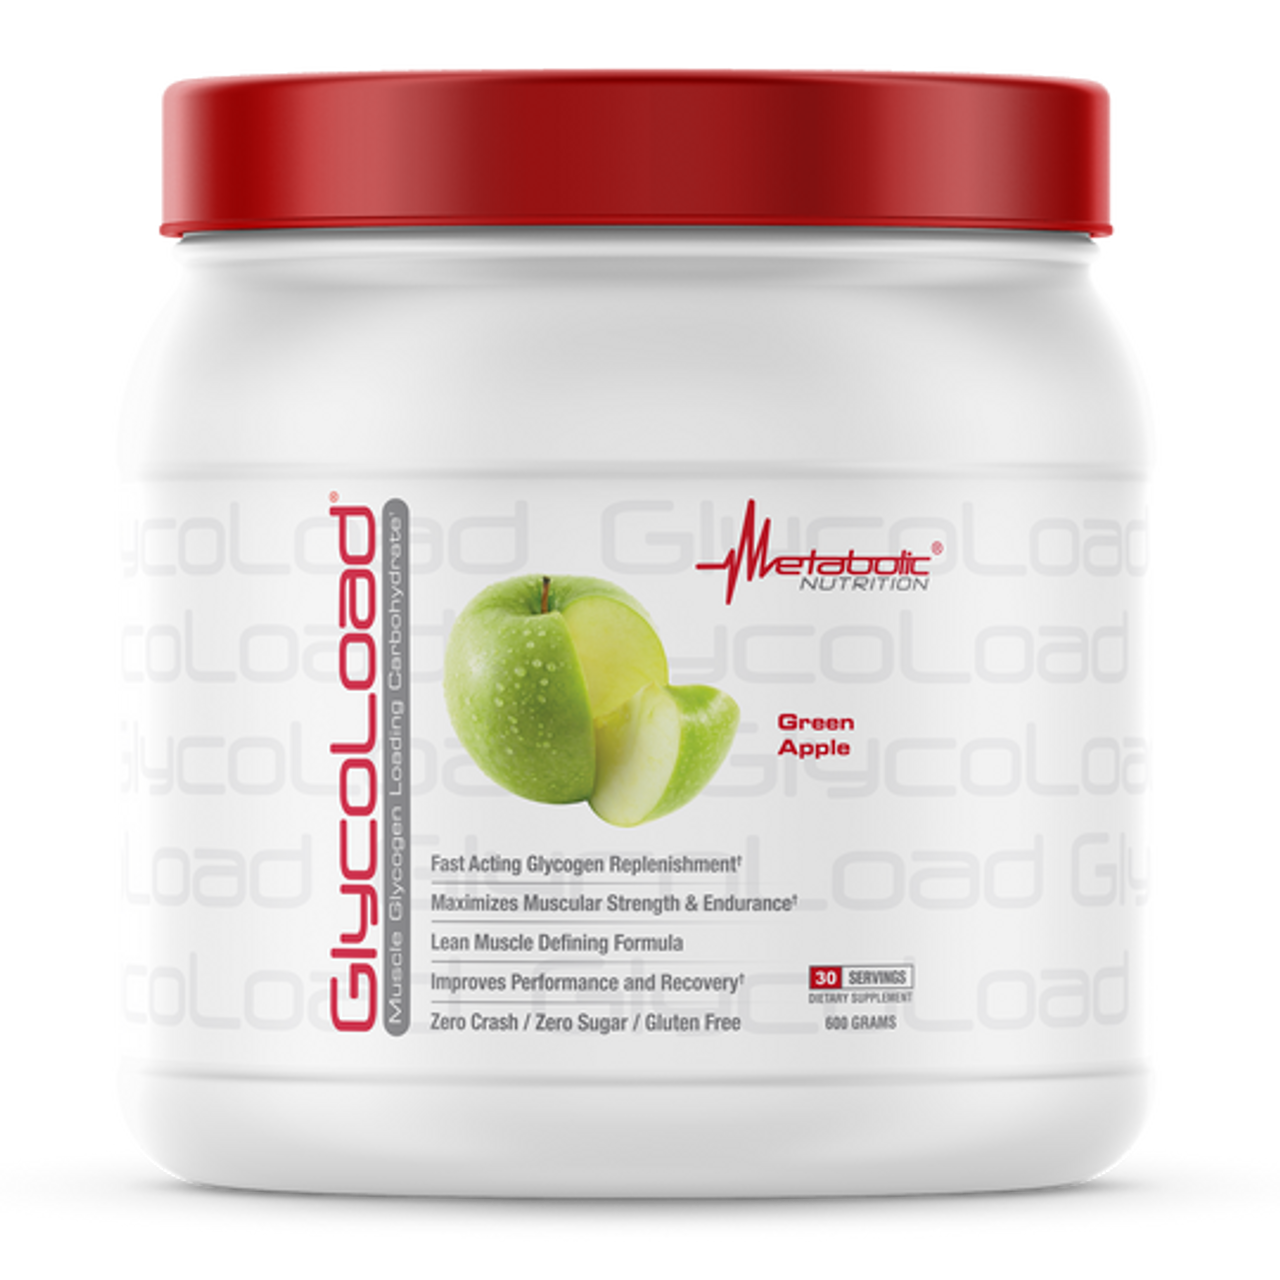 FOR ENDURANCE OR CARDIO TRAINING: Take 1 scoop of GlycoLoad with 6oz of cold water.

FOR HIGH INTENSITY TRAINING AND FUNCTIONAL FITNESS: Take 2 scoops of GlycoLoad with 12oz of cold water.

FOR HIGH VOLUME TRAINING AND MUSCLE BUILDING:Take 3 scoops of GlycoLoad with 18oz of cold water.

NOTE: Best results are seen when these dosages are taken prior to and after your workout. GlycoLoad can be added to any pre-workout formula such as METABOLIC NUTRITION’S E.S.P. EXTREME or P.S.P. to improve athletic performance and boost lean muscle growth.